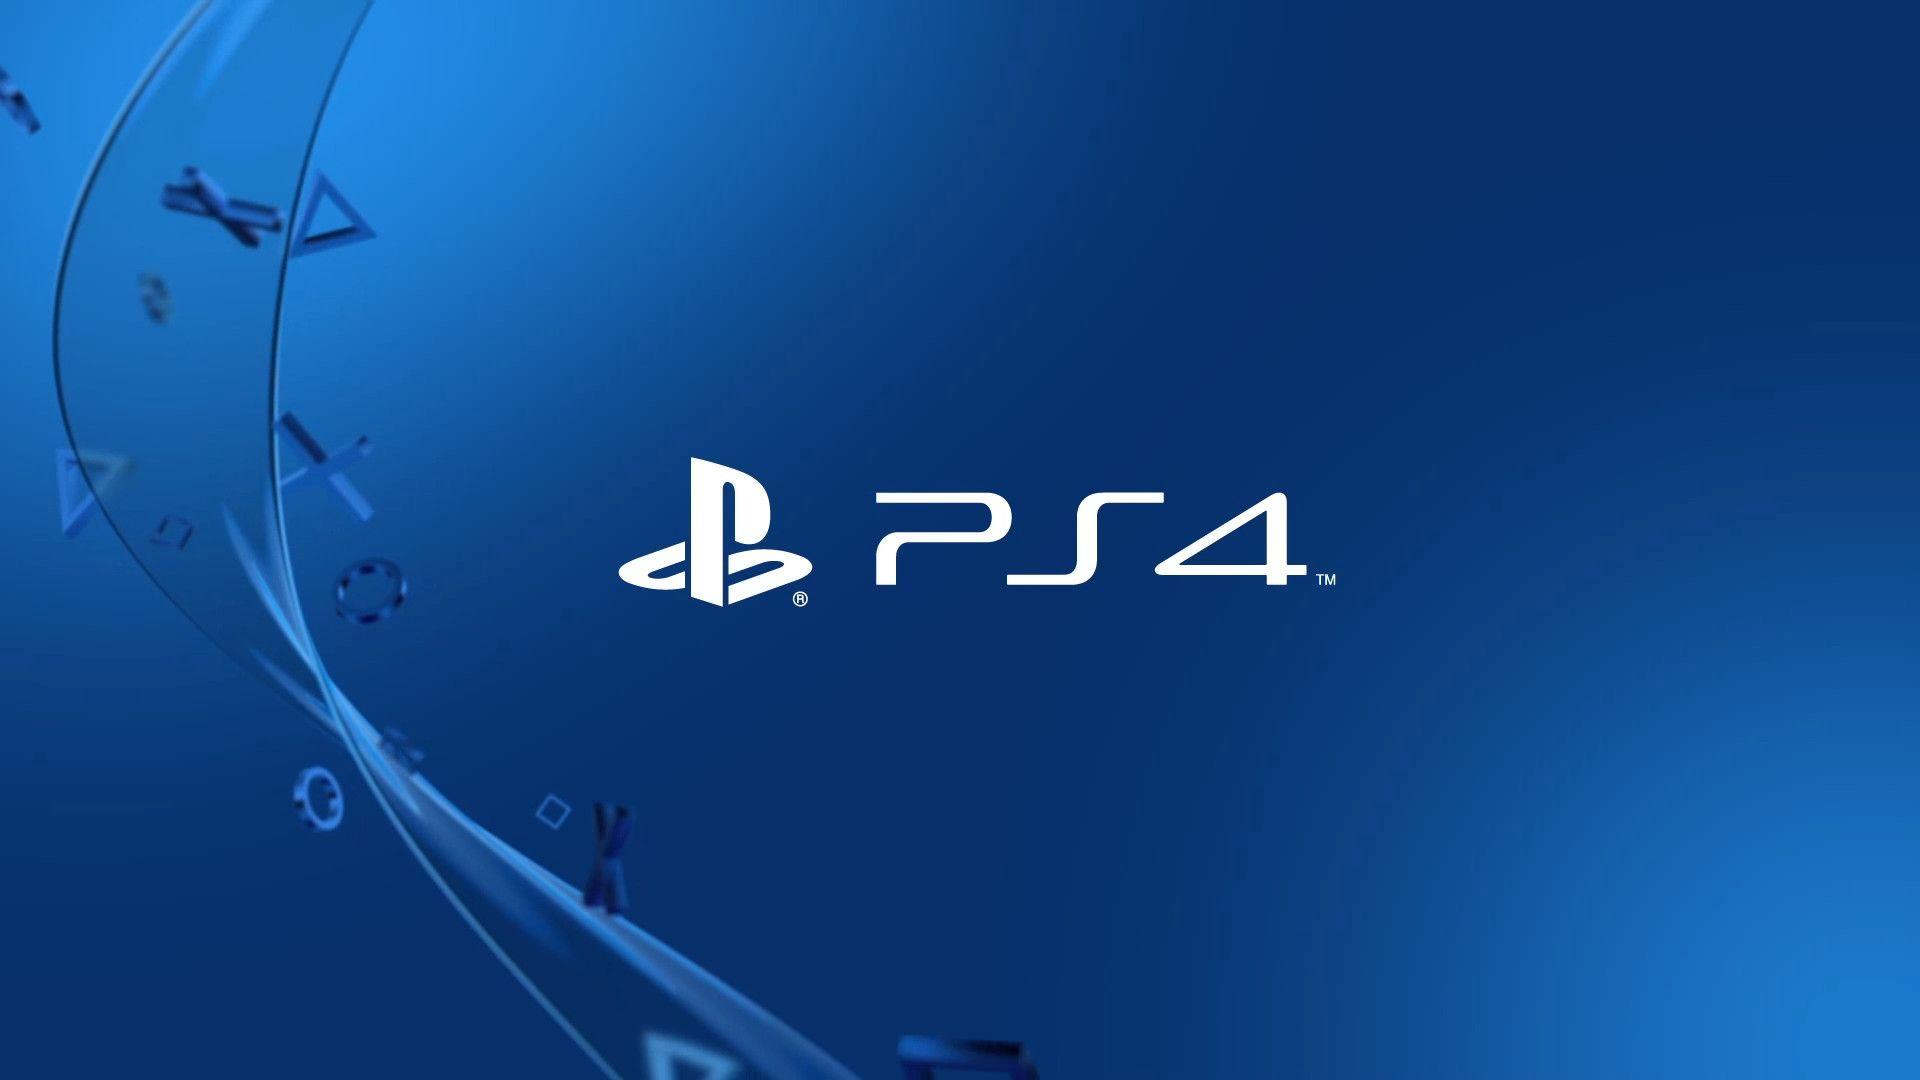 Ps4 Live Wallpapers